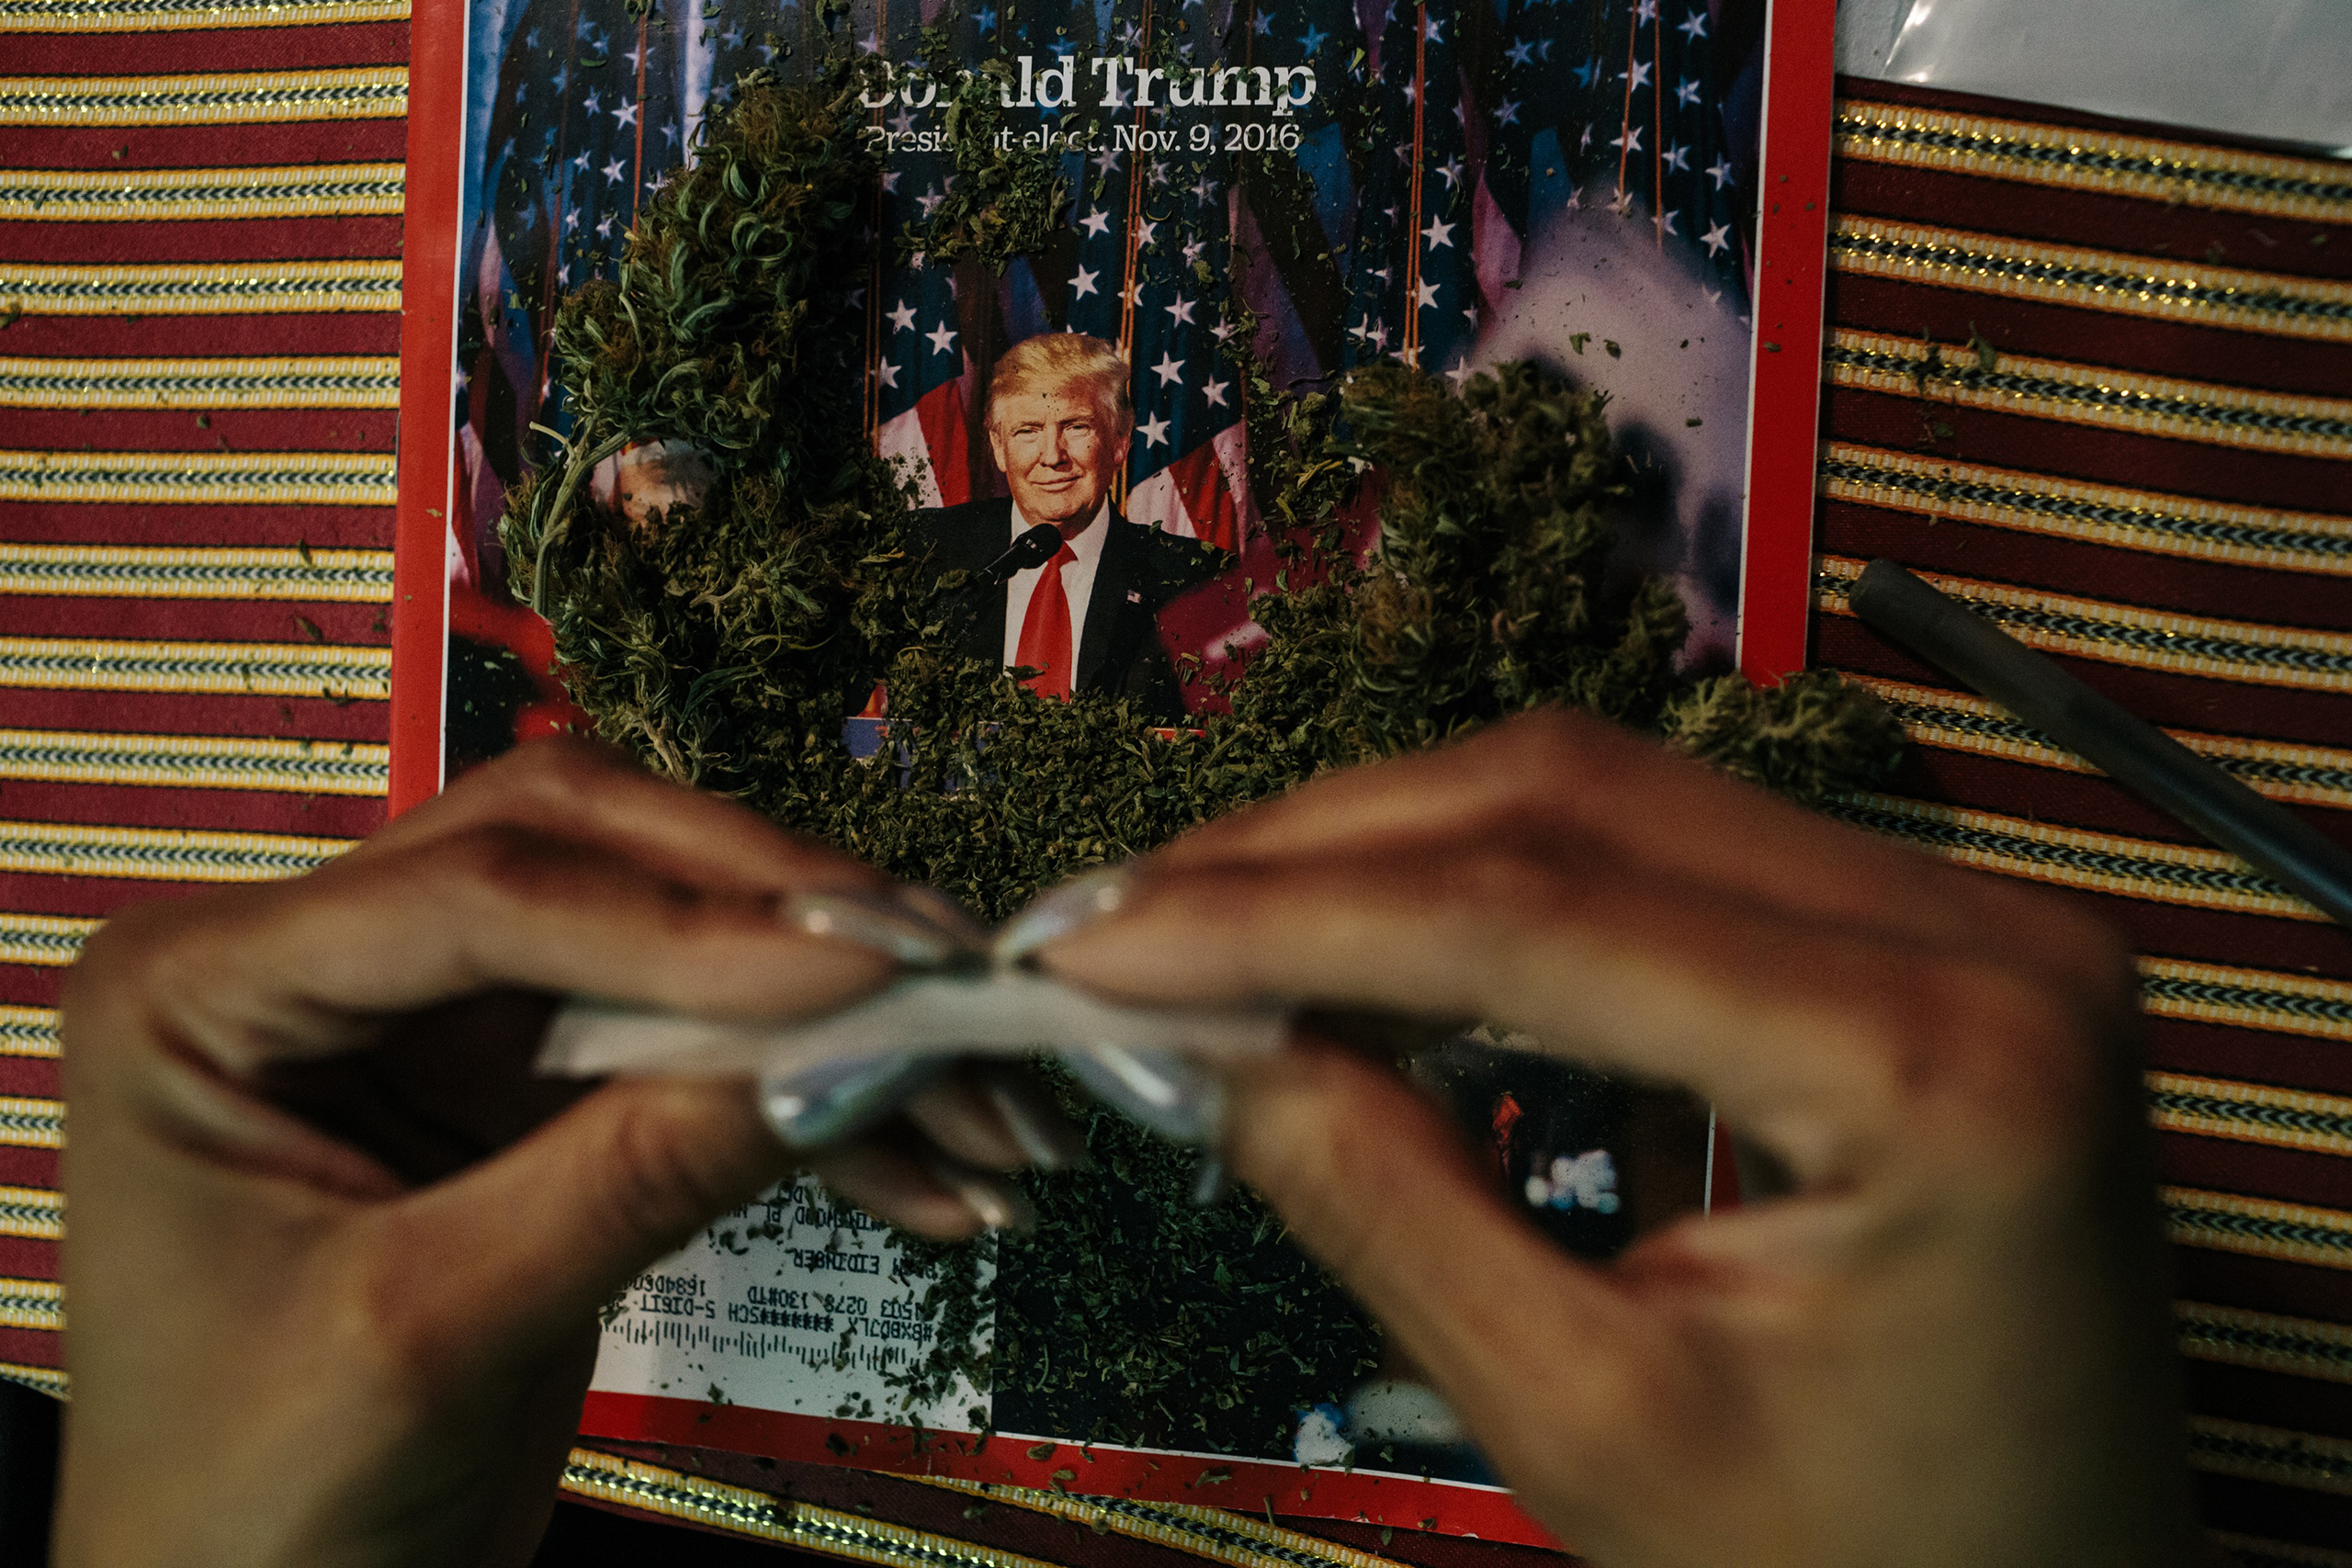 An activist from the cannabis community DCMJ rolls a joint in a Washington, D.C., home on Jan. 16 in preparation for President-Elect Donald Trump’s inauguration. A cofounder of the group said TIME magazines were used after learning a photographer on assignment for TIME would observe their operations. Other newspapers and magazines, like High Times, have previously been used when the group has been photographed by other media. (Lexey Swall—GRAIN for TIME)